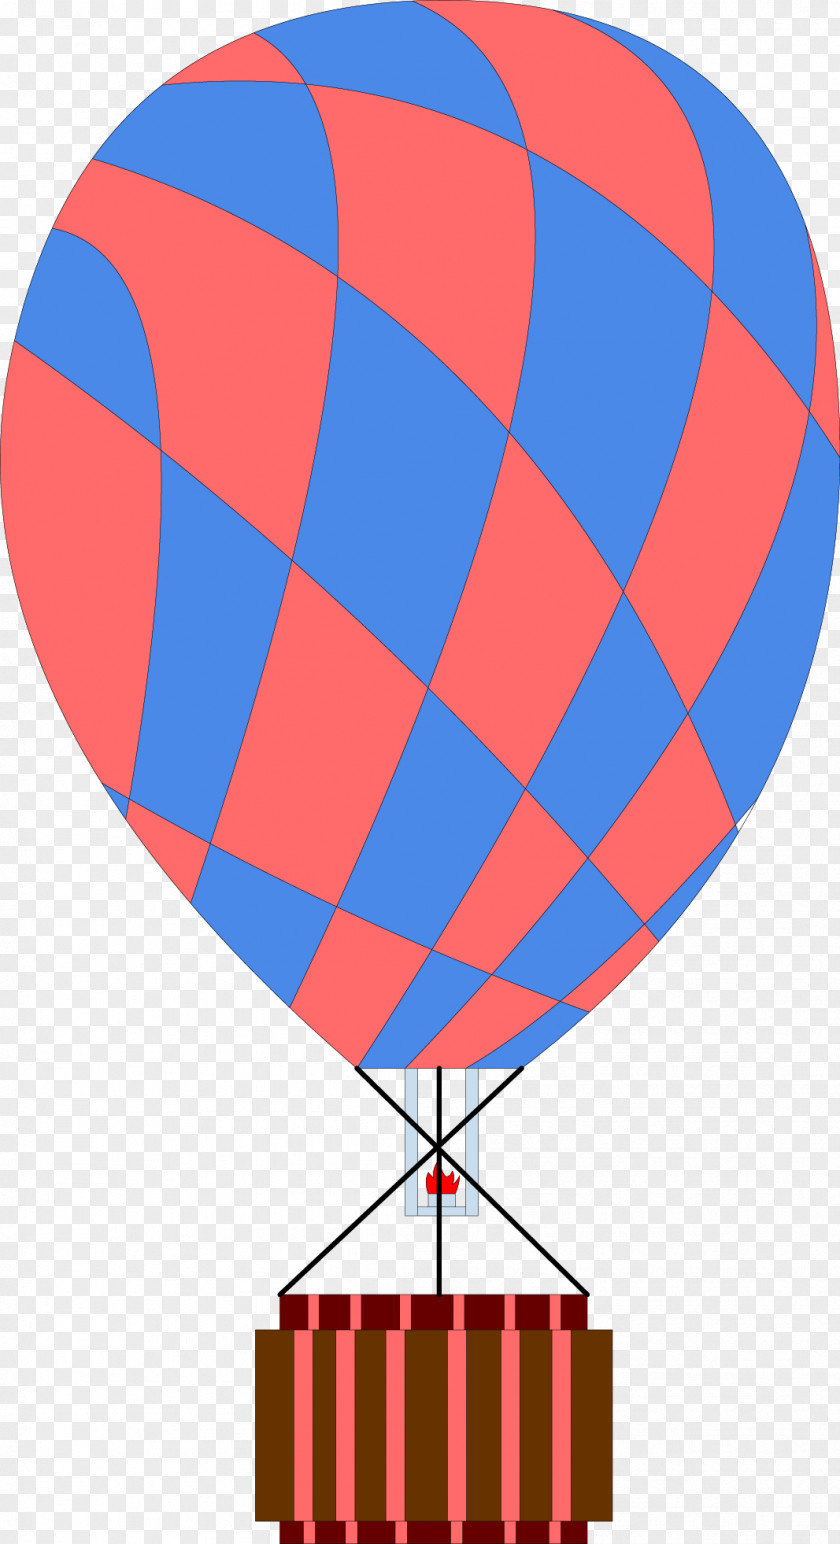 Hot Air Balloon Atmosphere Of Earth Basket PNG